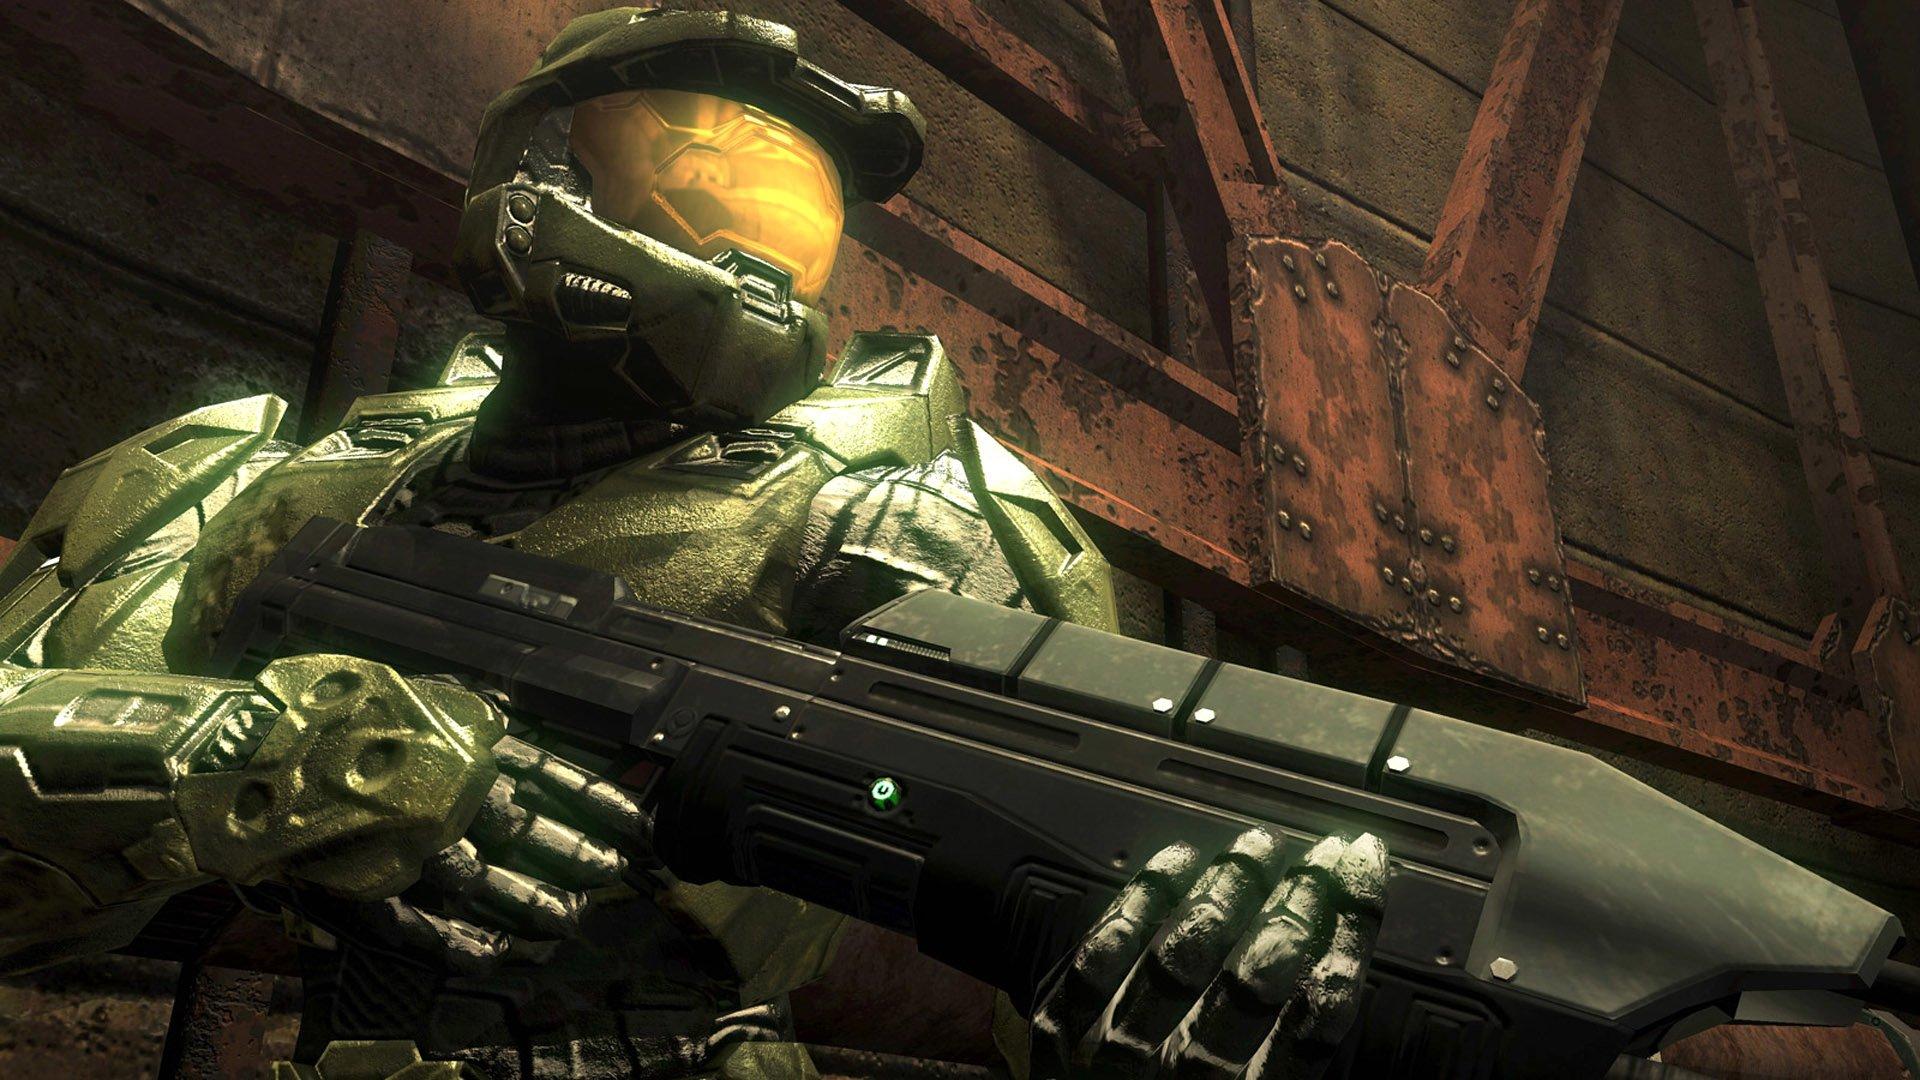 Halo: Combat Evolved HD Wallpaper. Background Imagex1080